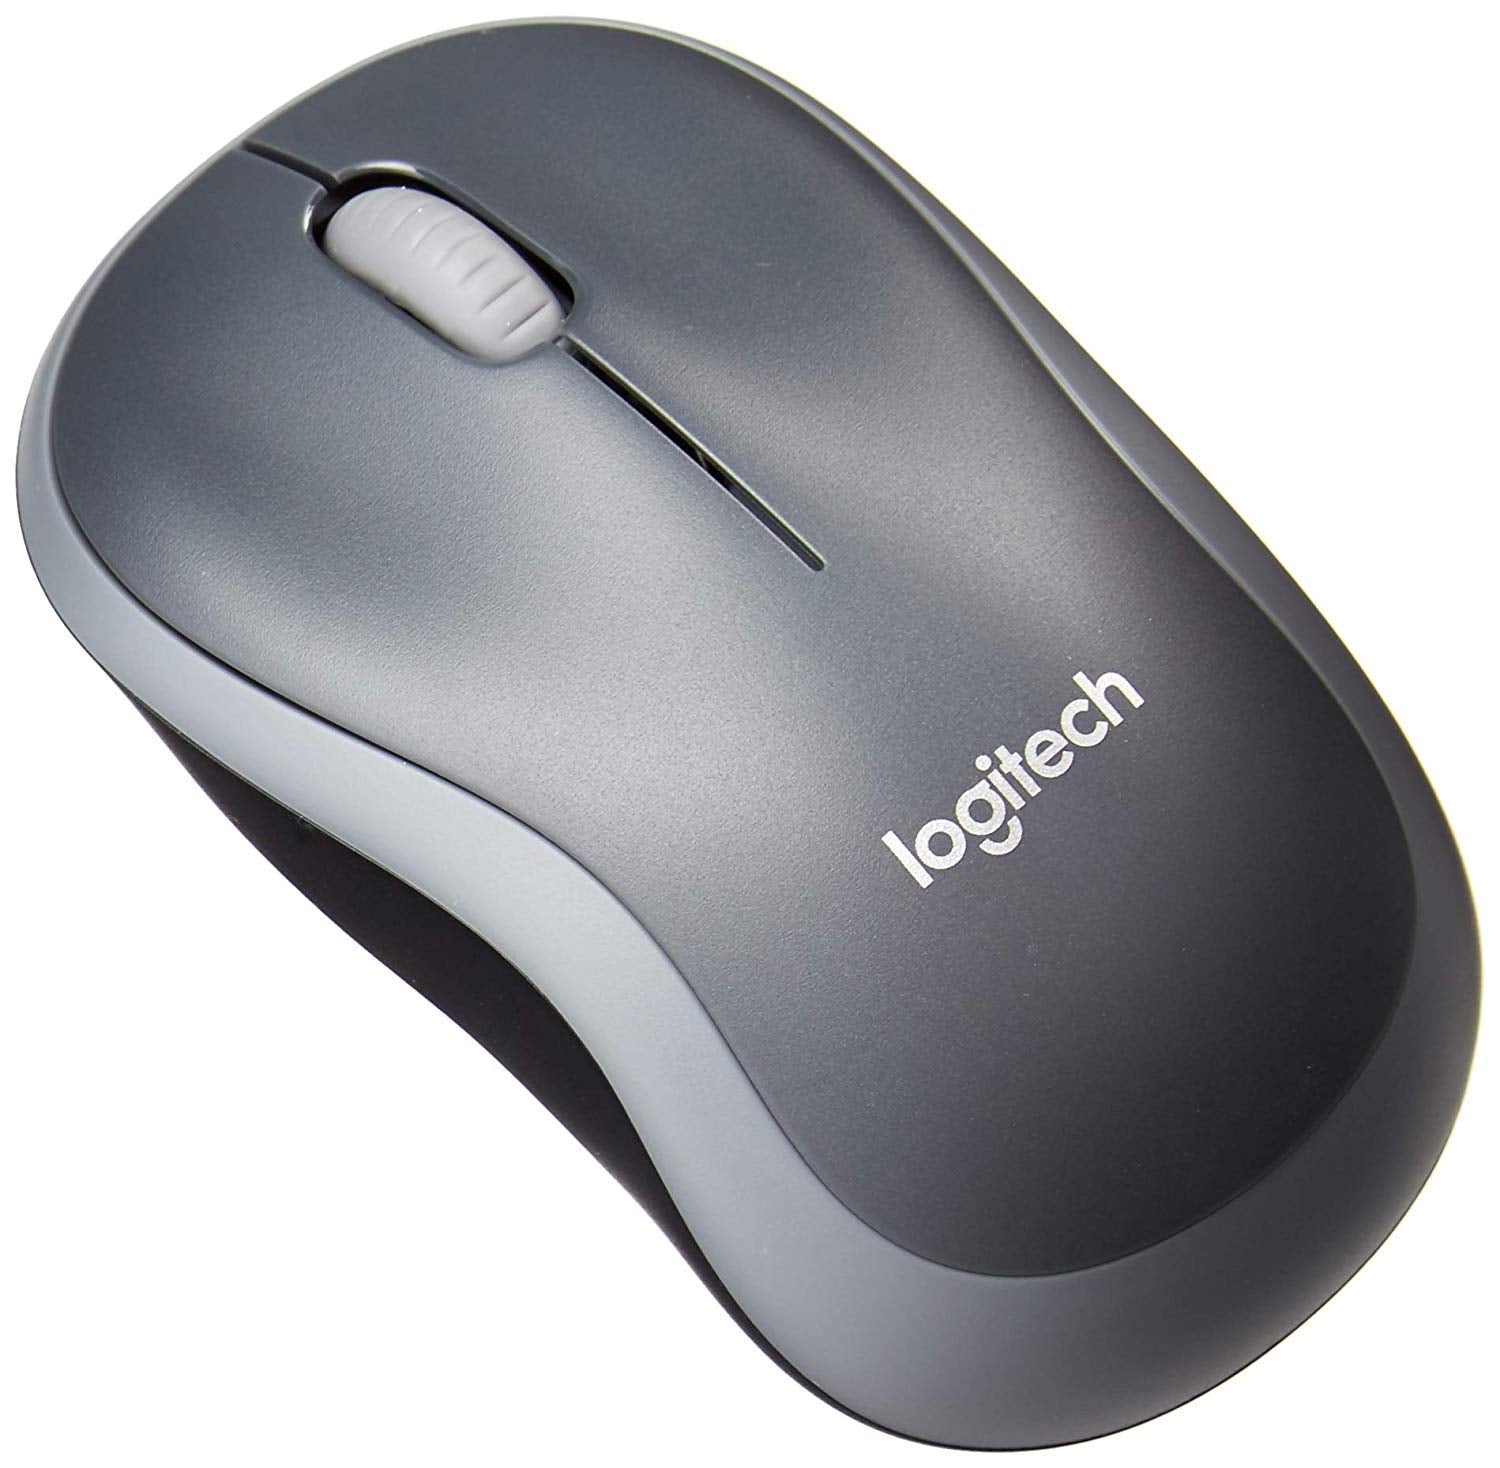 Logitech M185 Wireless Mouse for Computers Laptops Fast Scrolling Bundle (100-Pack)